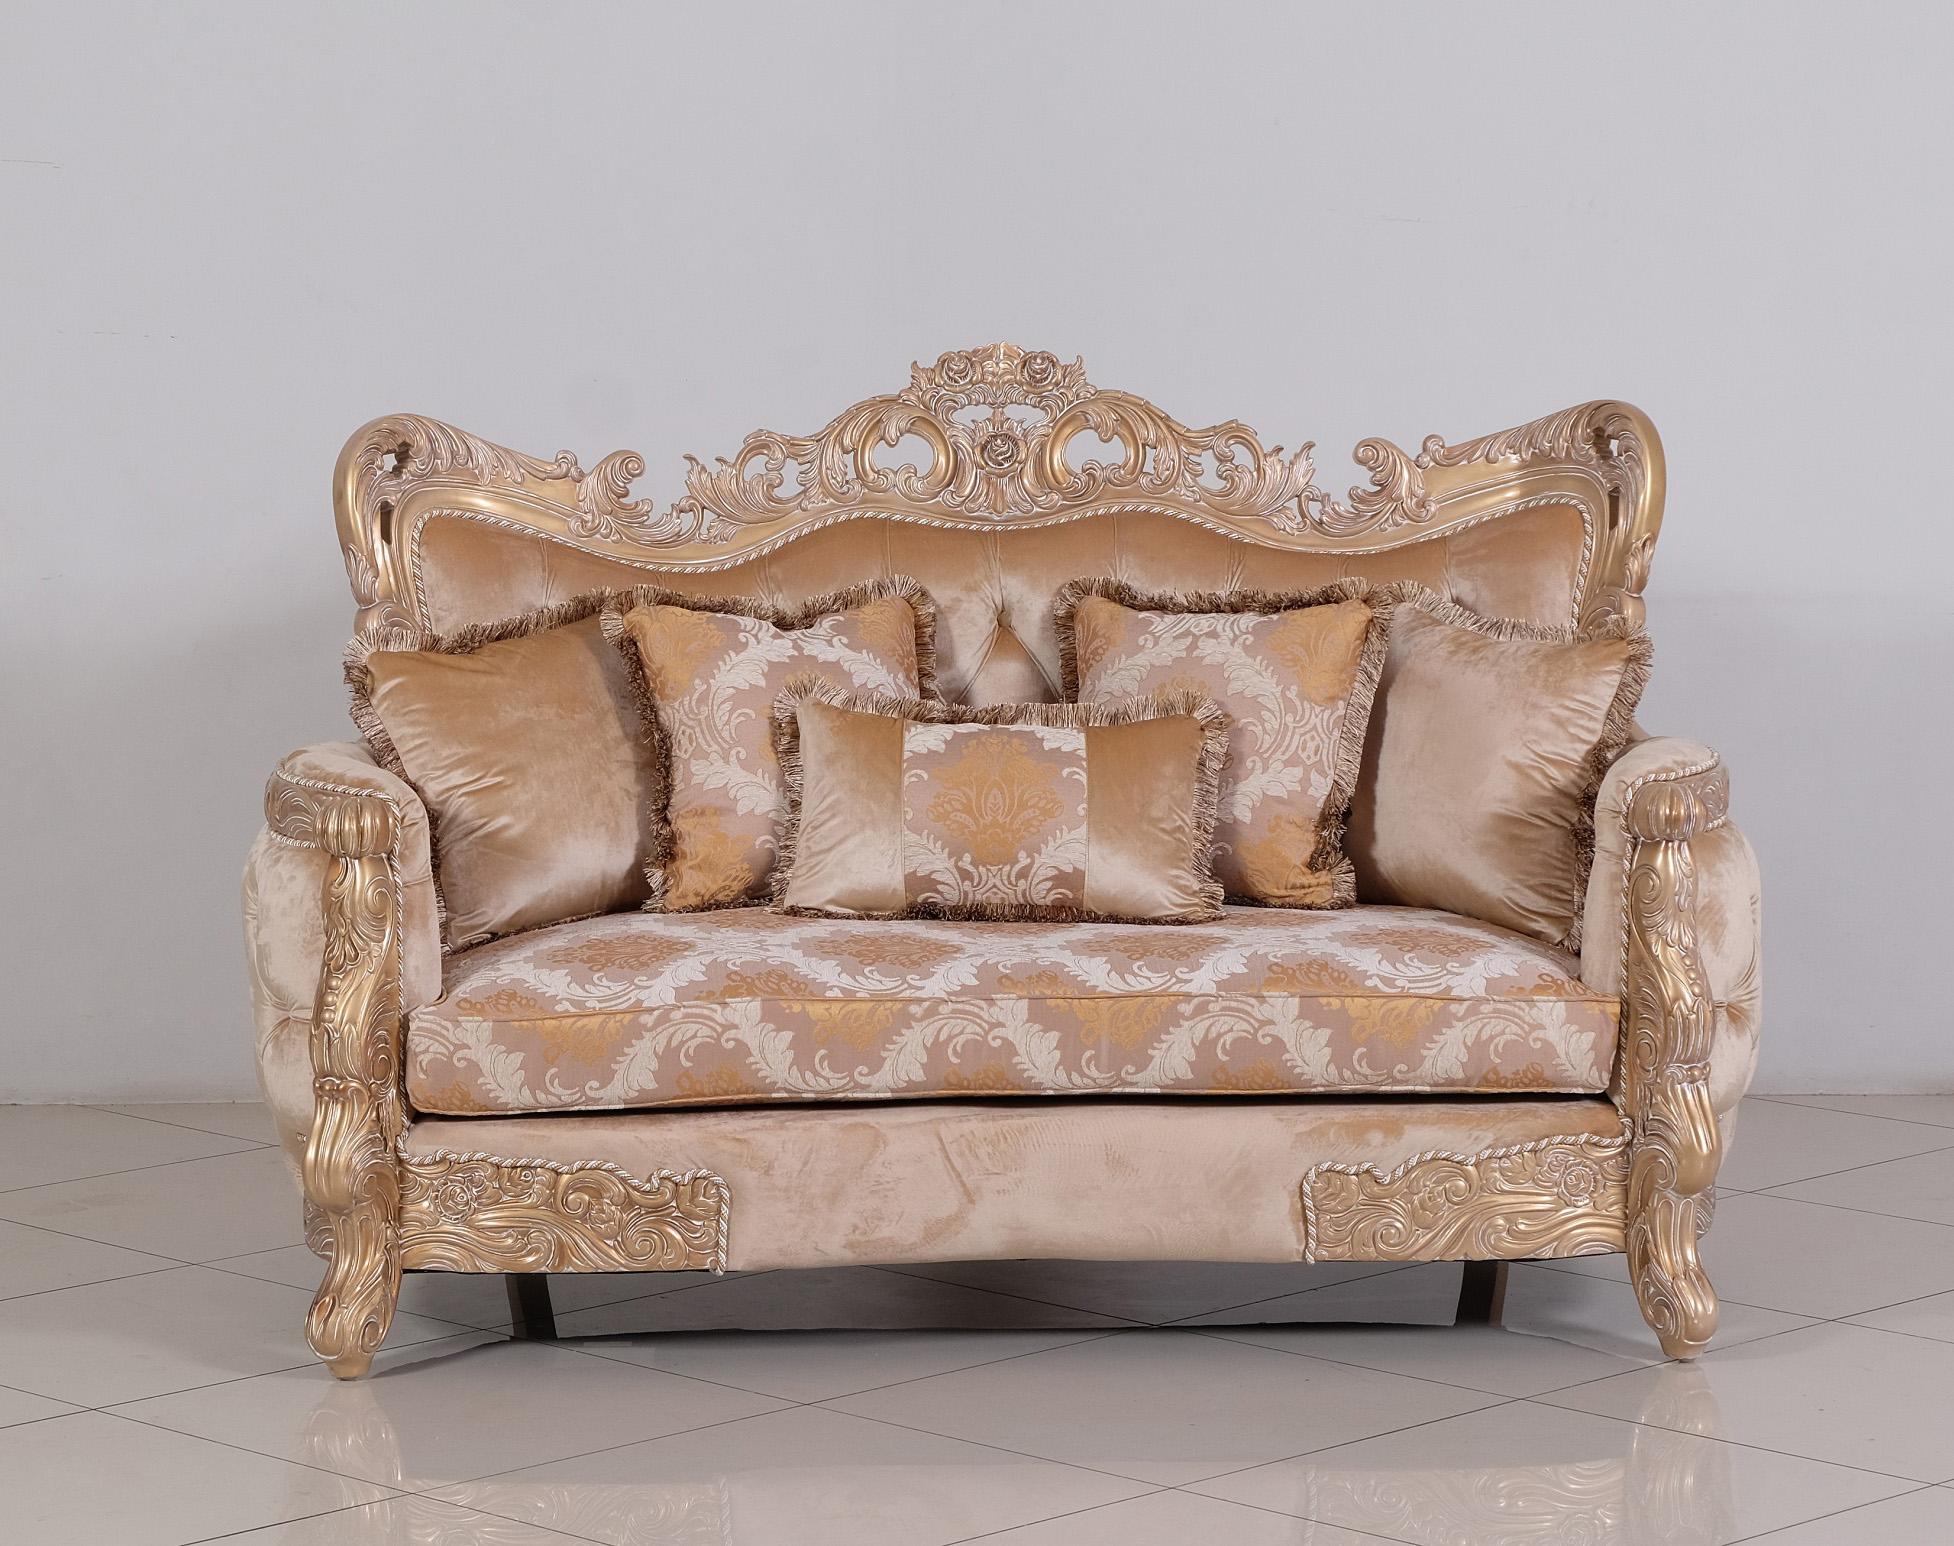 

    
Luxury Champagne & Cooper IMPERIAL PALACE Loveseat EUROPEAN FURNITURE Classic
